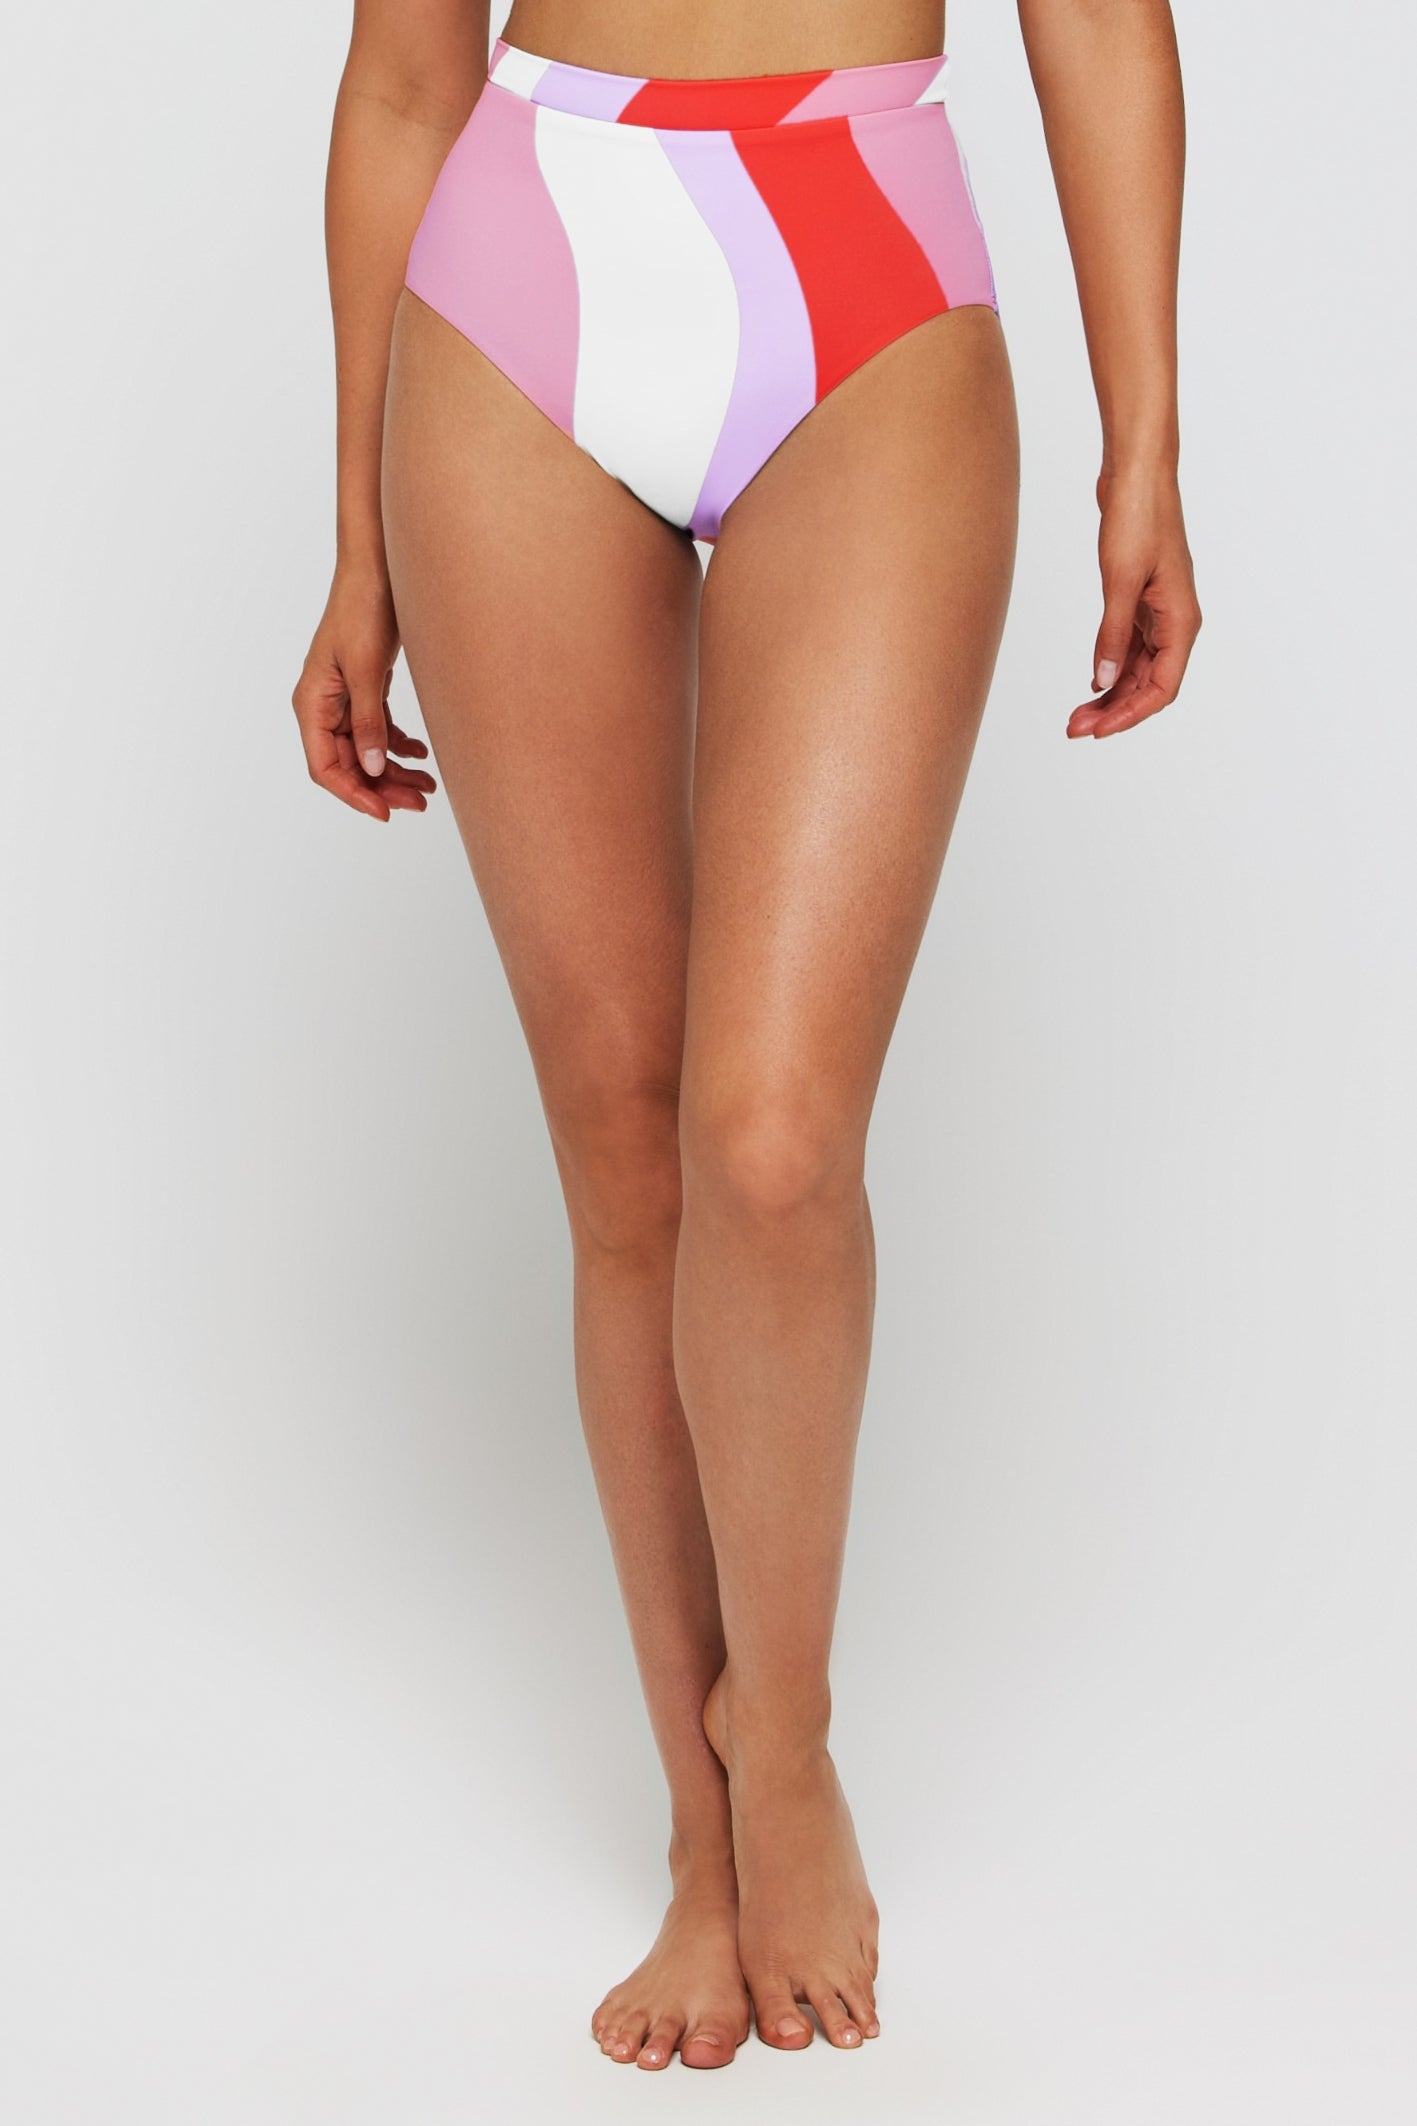 Lauren Two-Piece Swimsuit Bottom by Hermoza